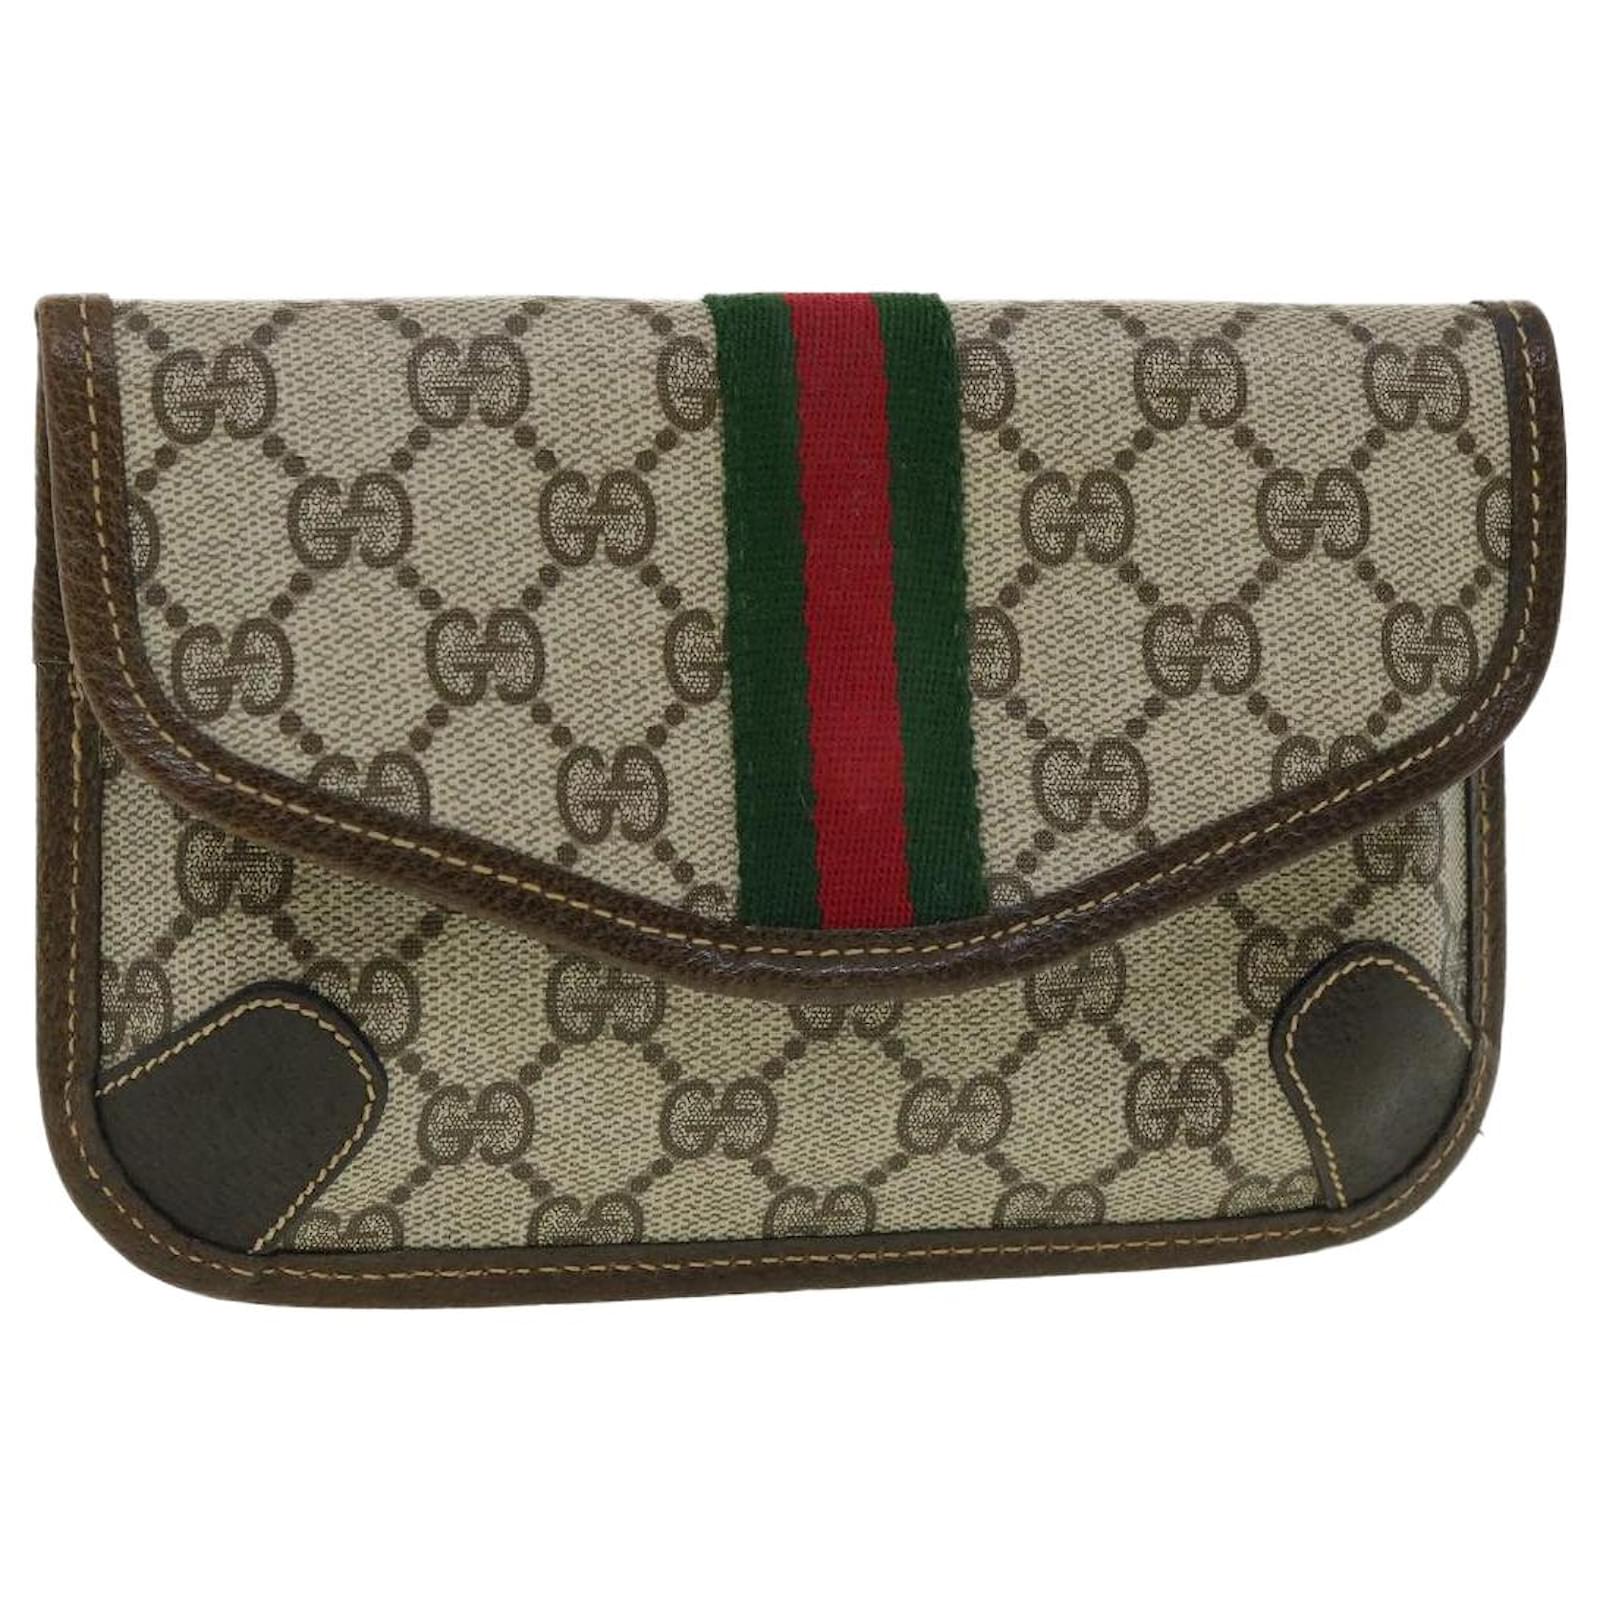 Gucci's Rebirthed Jackie Bag Is A Unisex Statement Accessory